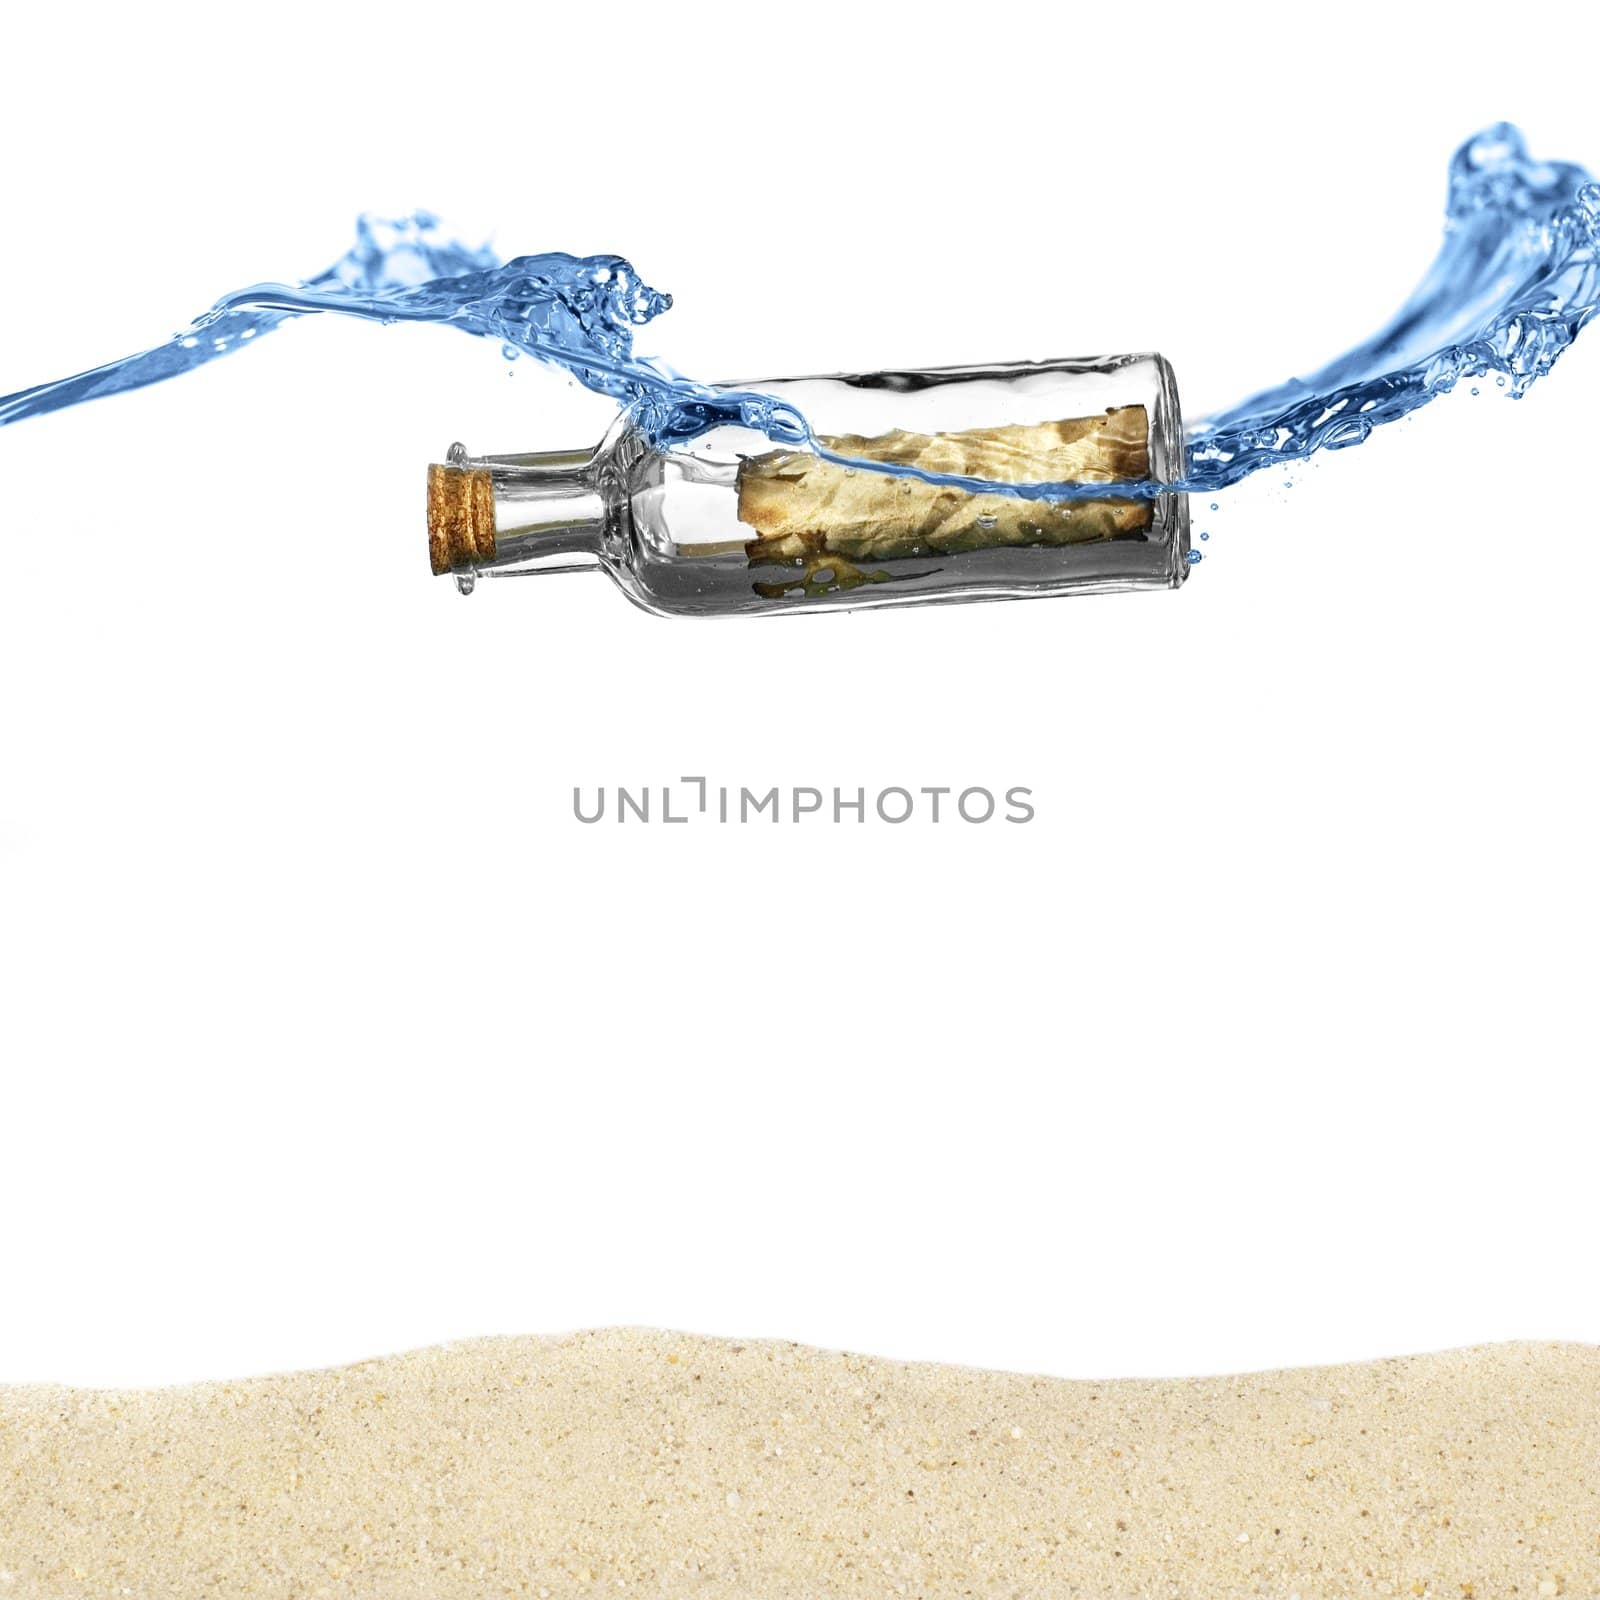 Message in a bottle floating in an ocean above sand.